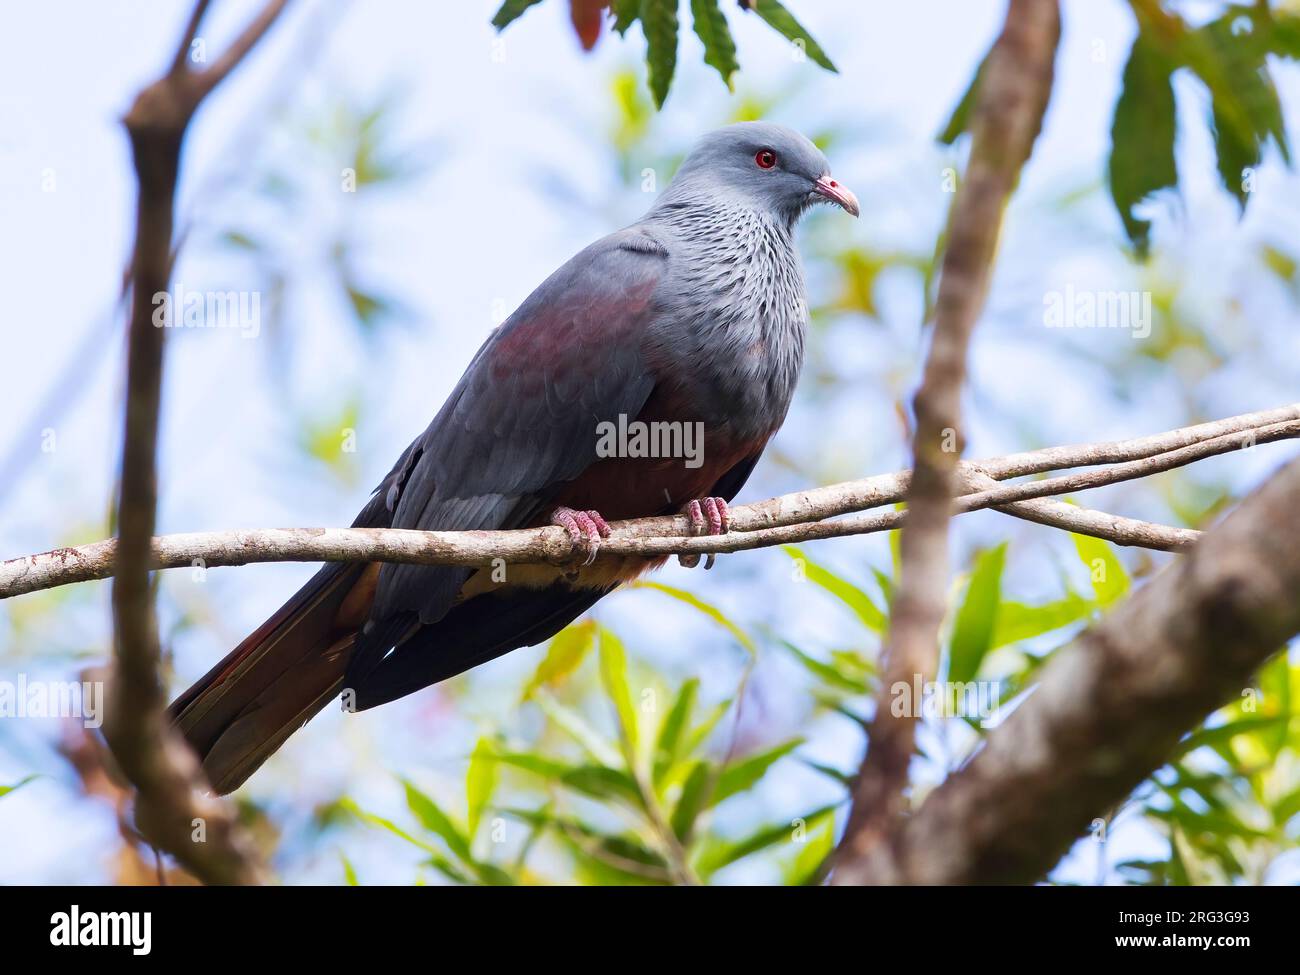 Goliath imperial pigeon (Ducula goliath), on New Caledonia, in the southwest Pacific Ocean. Also known as the New Caledonian imperial pigeon or Notou. Stock Photo